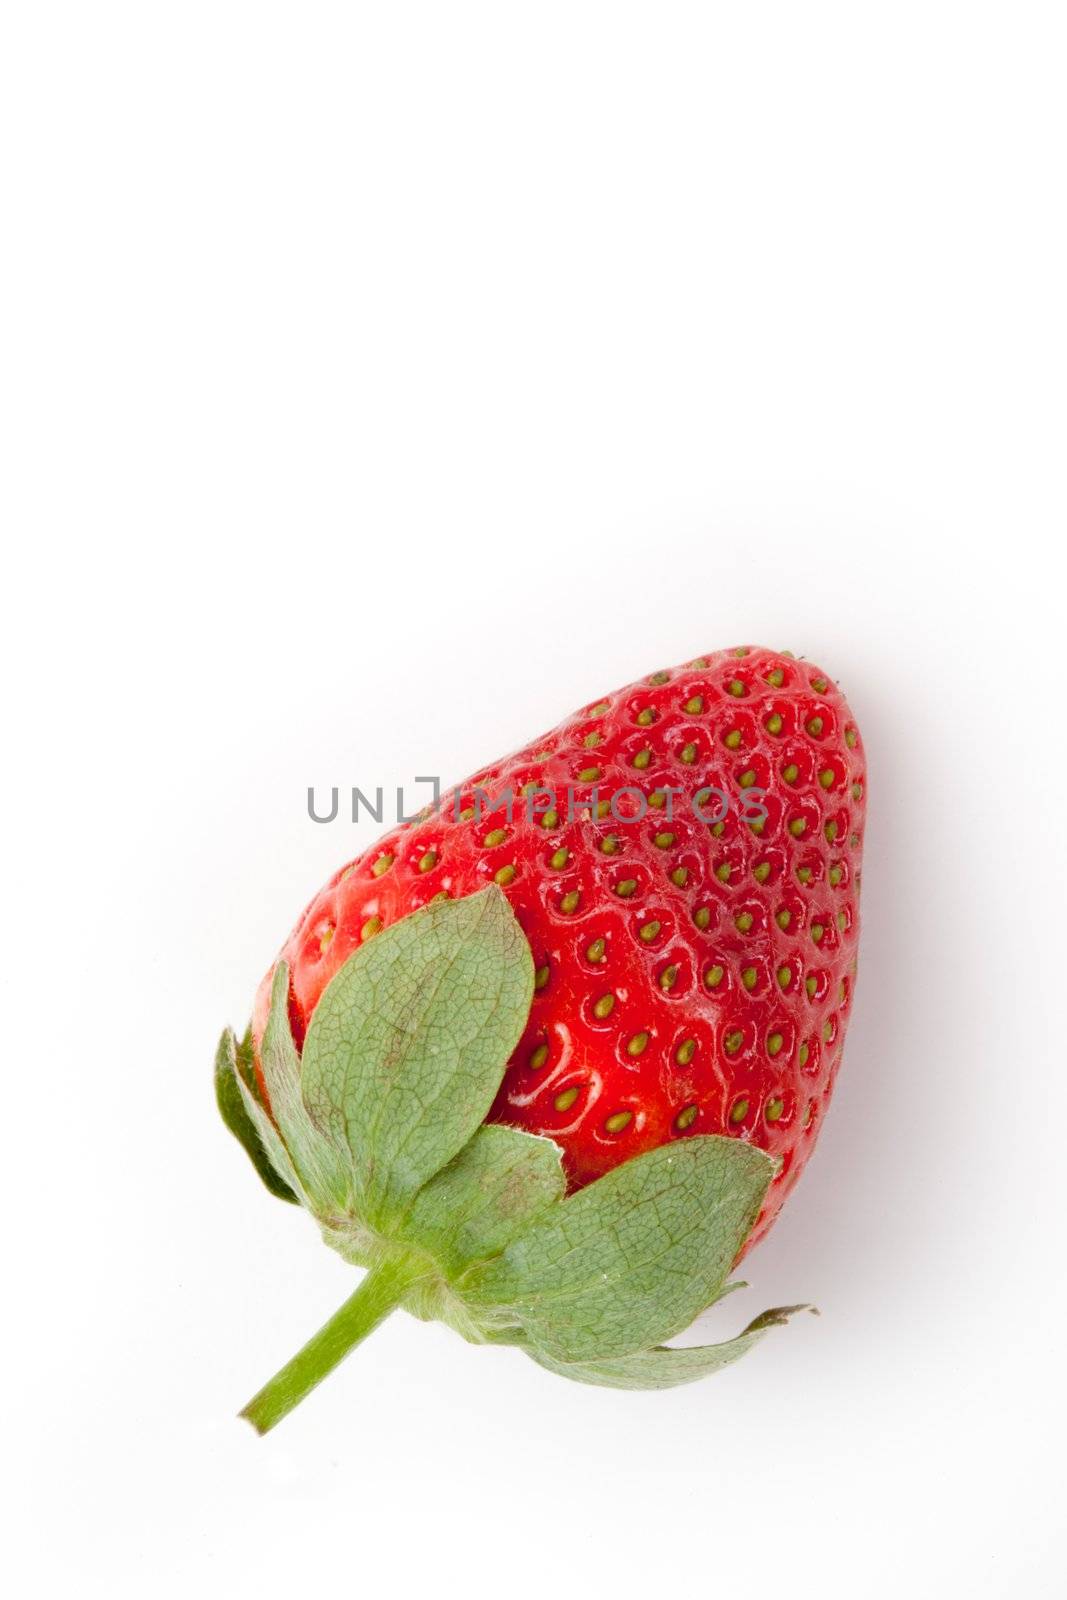 Strawberry against a white blackground